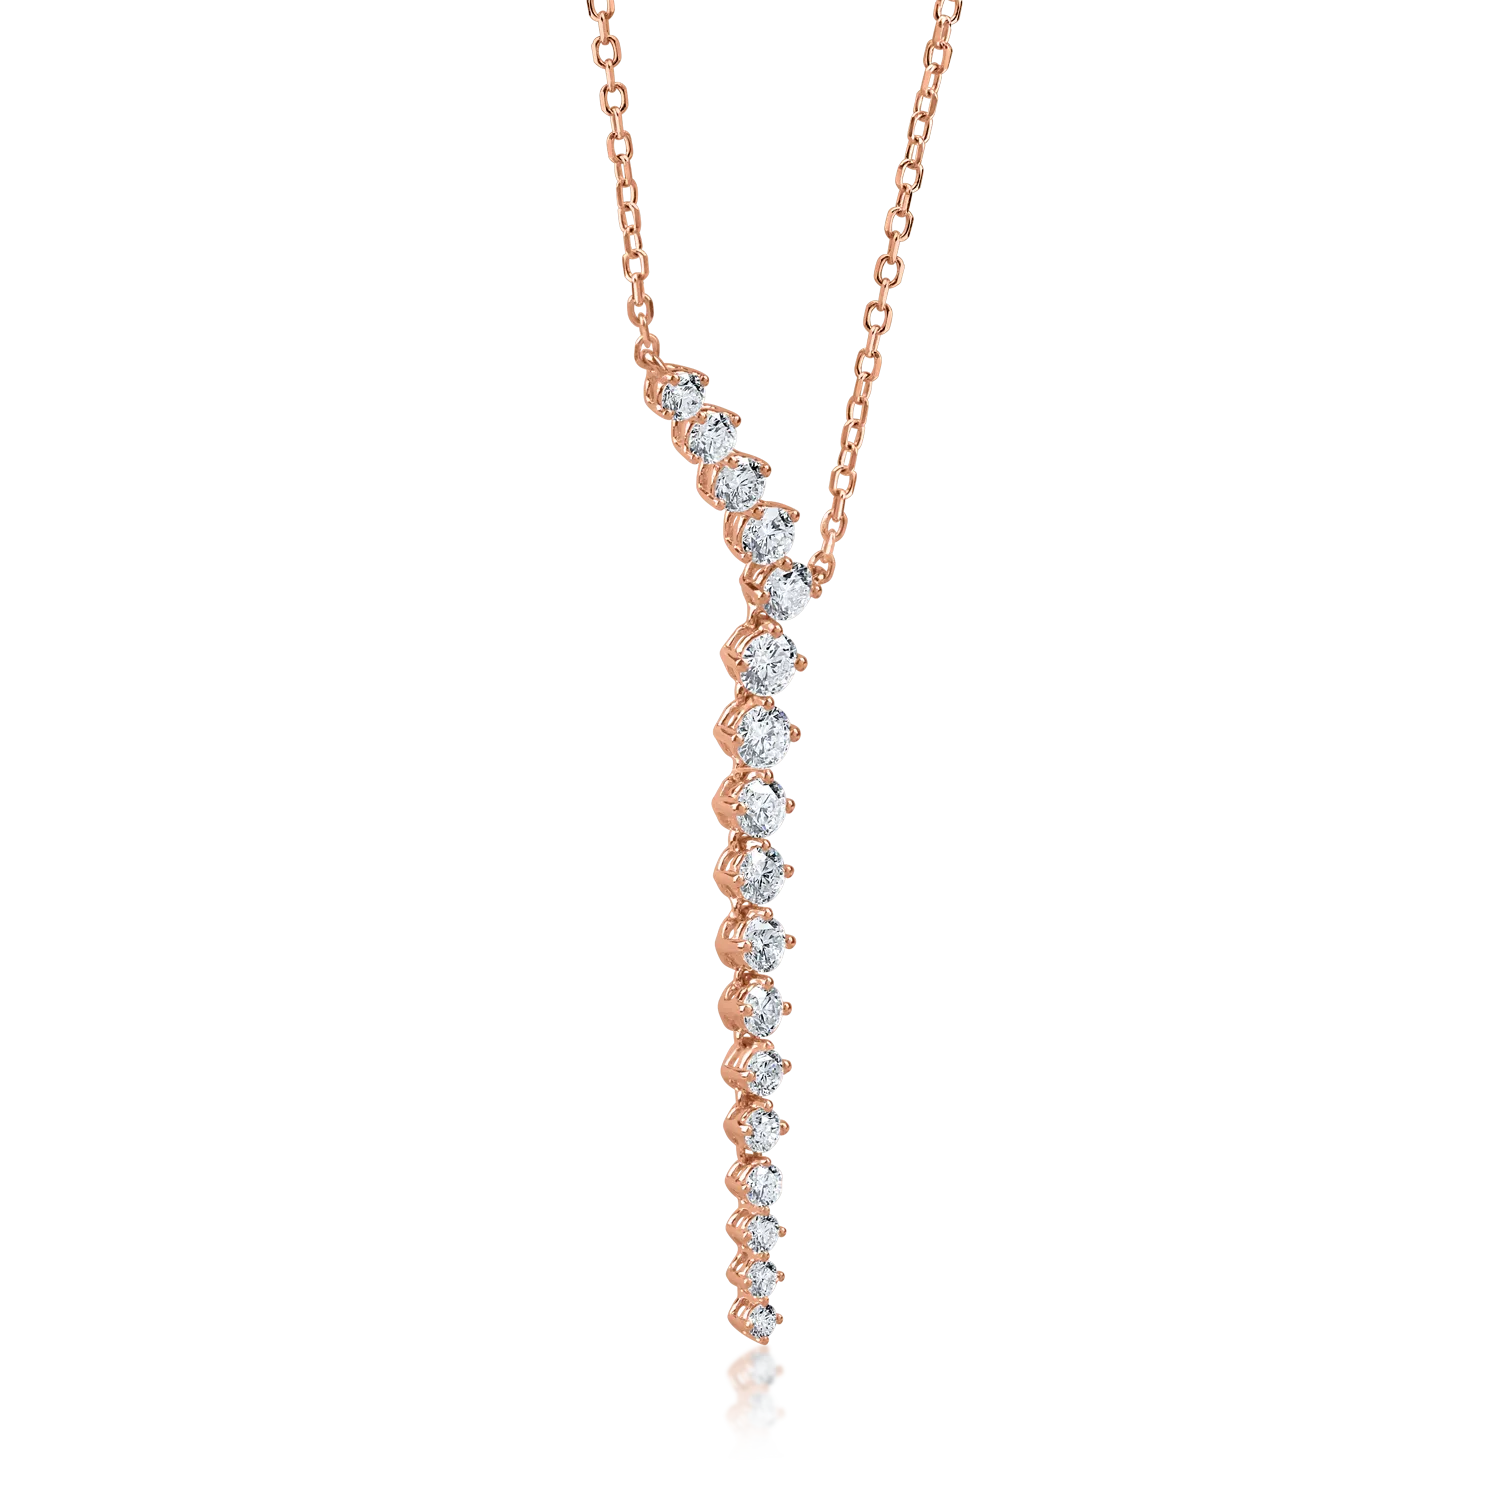 Rose gold necklace with 1.2ct diamonds